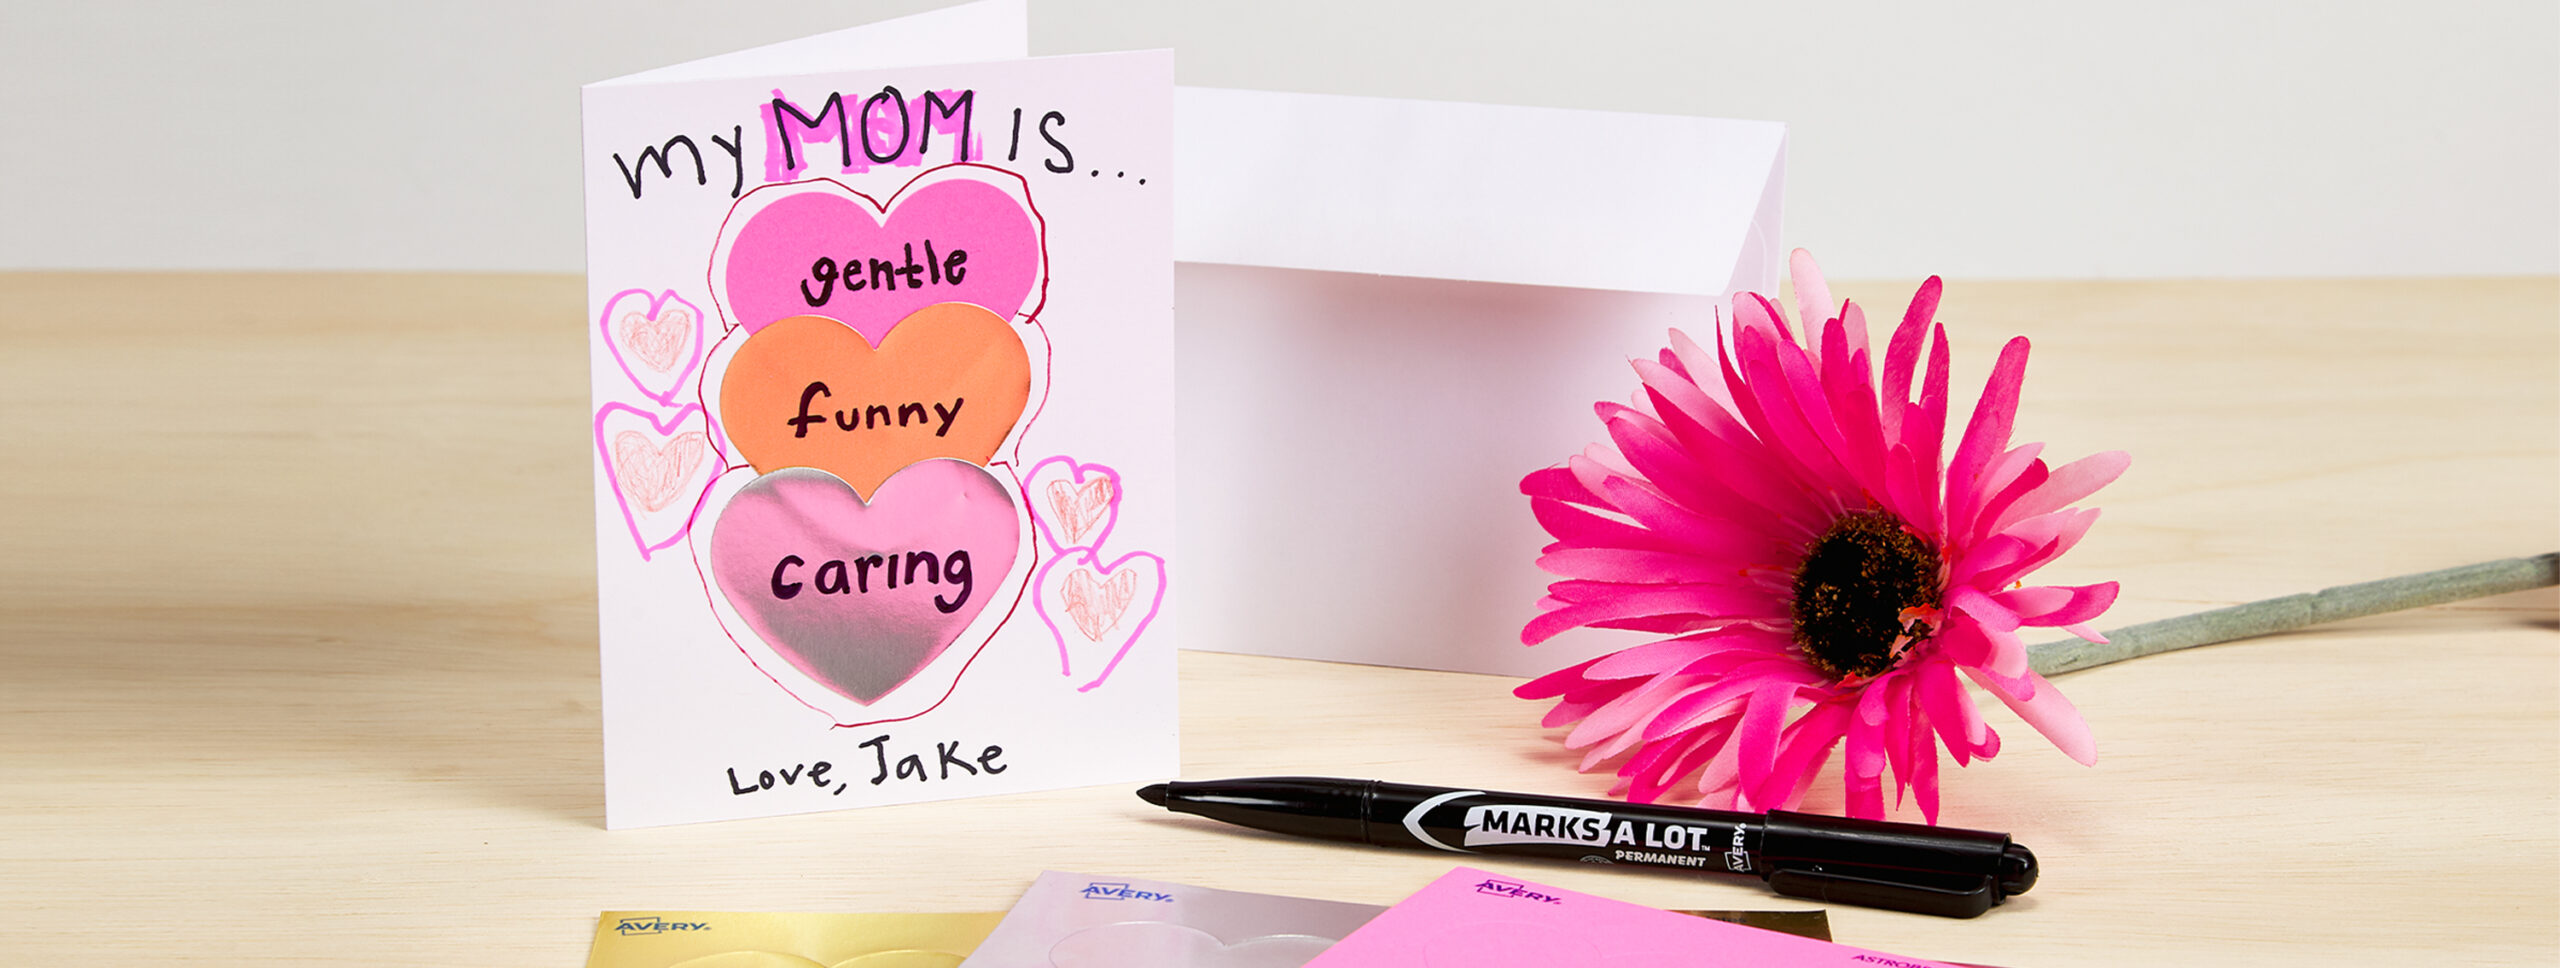 A DIY Valentine's Day Craft That's Easy & So Cute - The Mom Edit